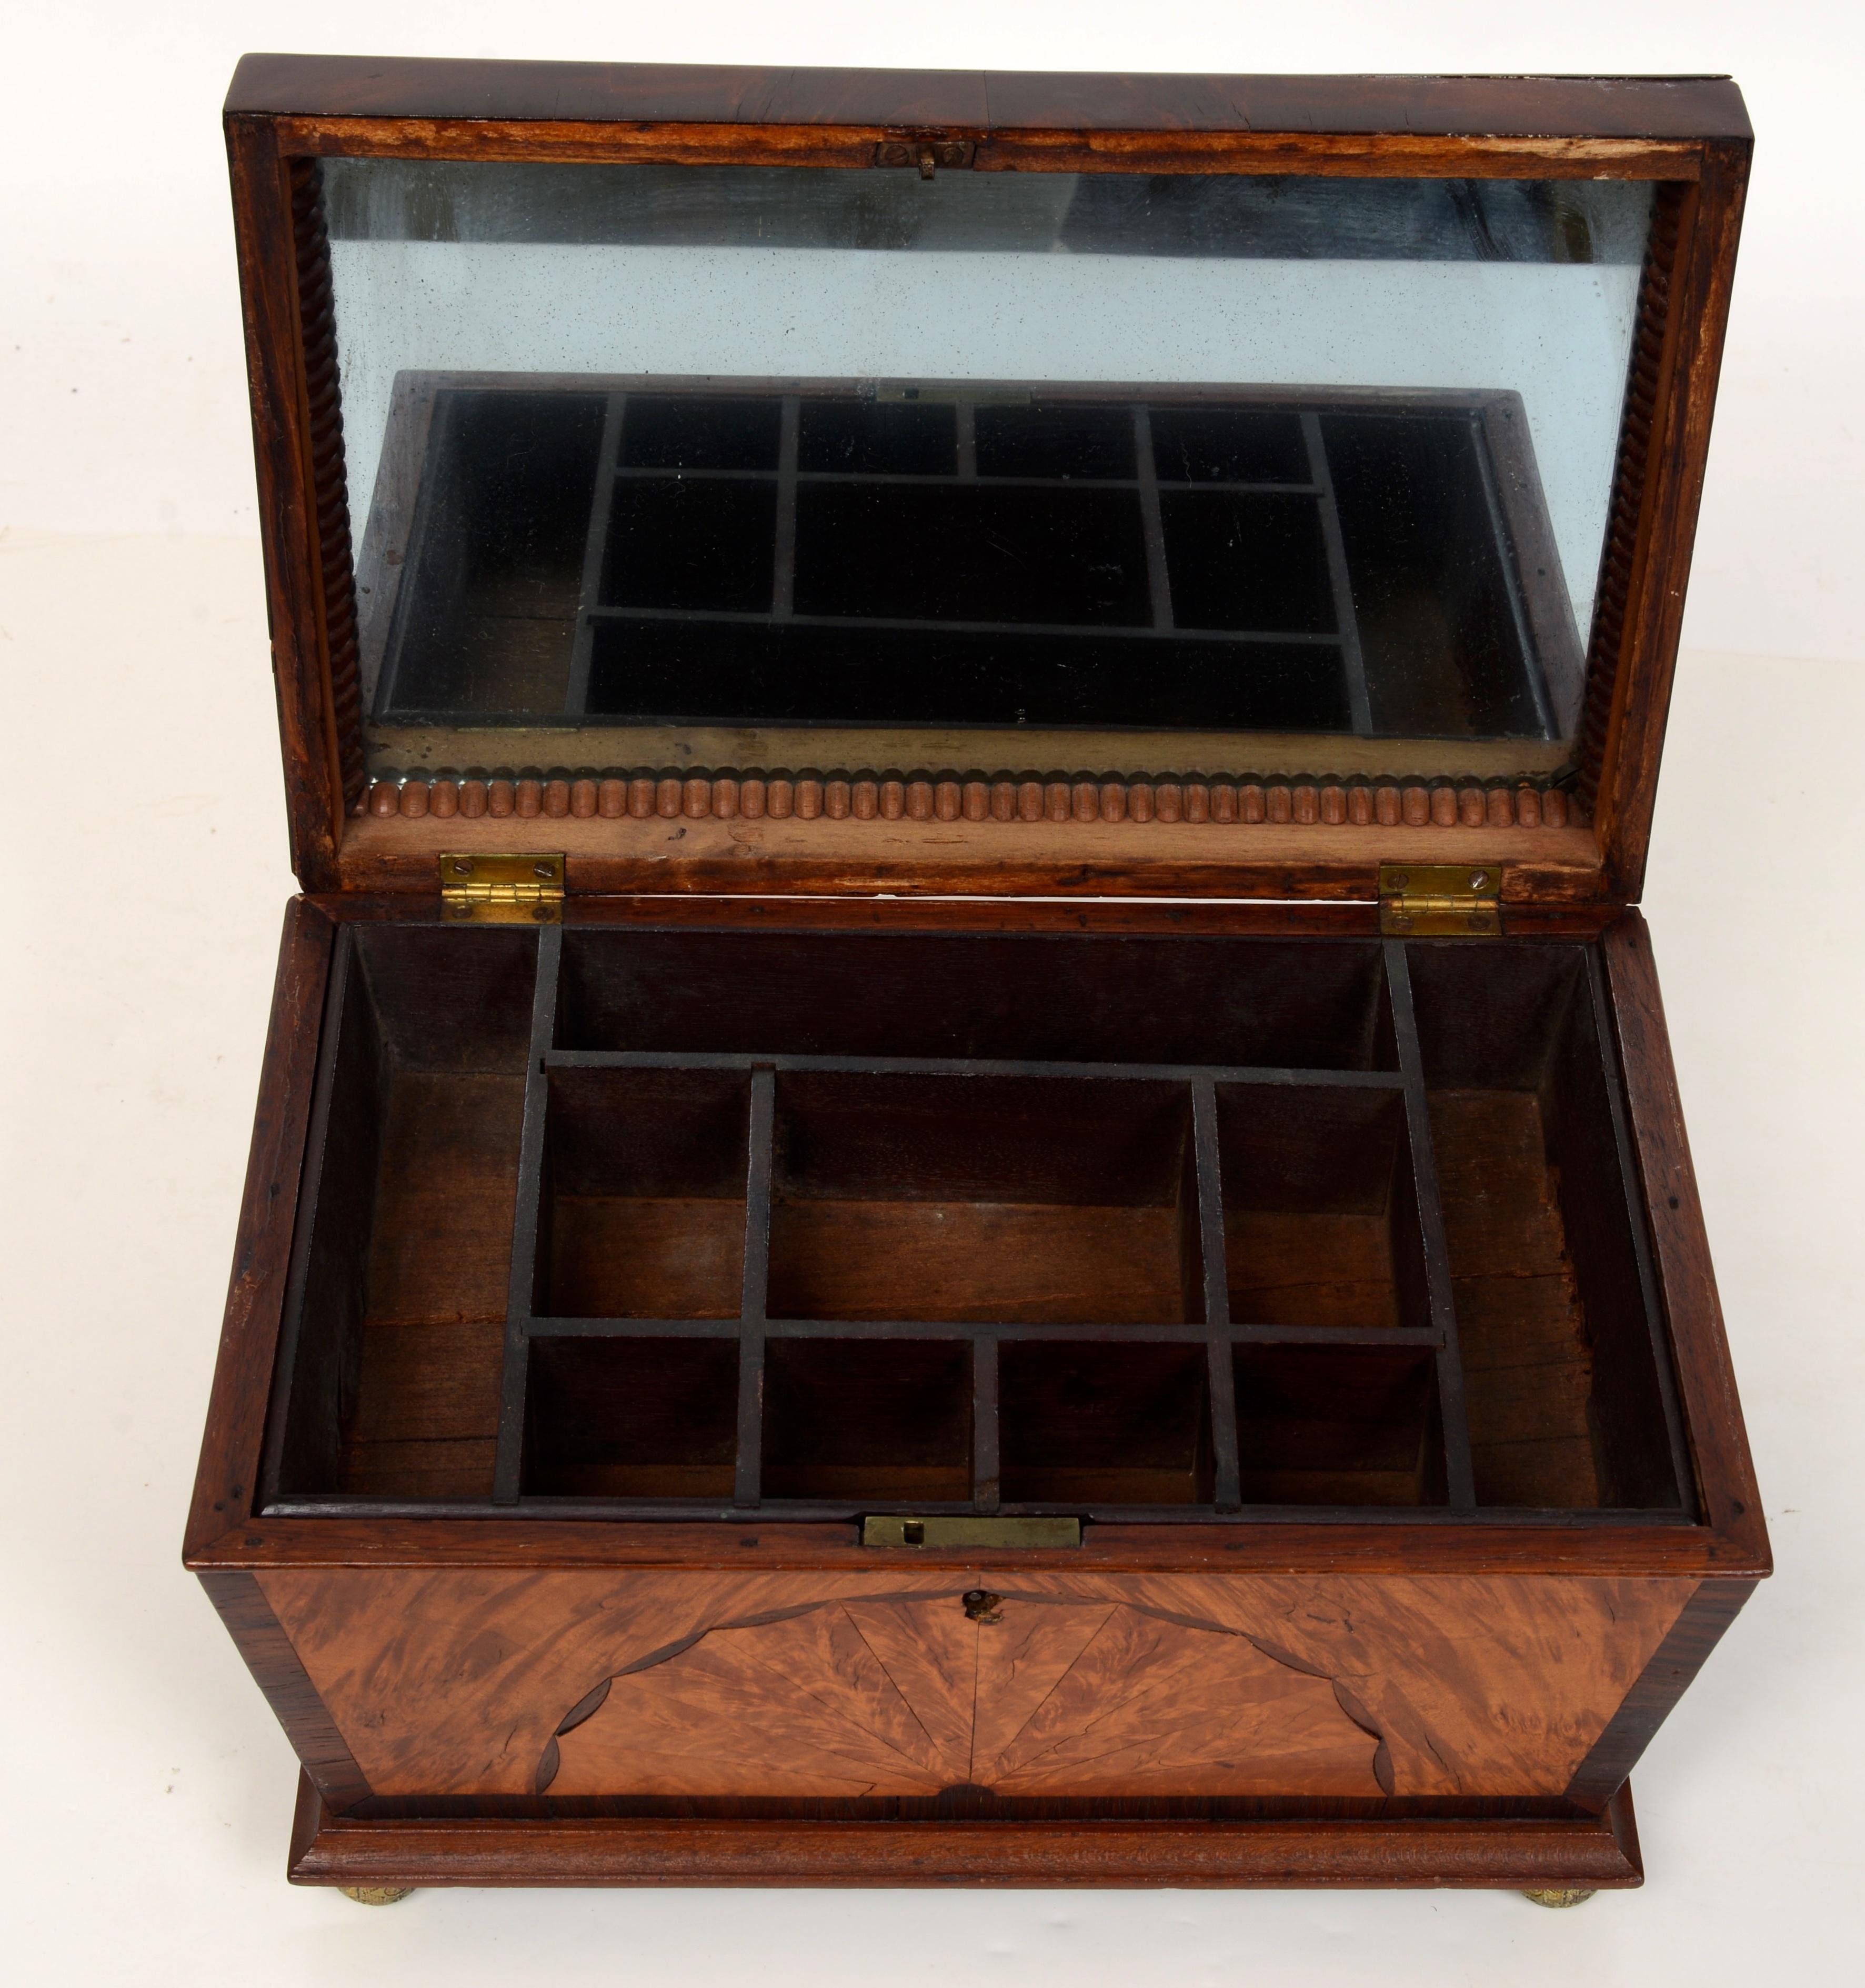 19th Century Regency Fan Inlaid Jewelry Box With Fitted Interior and Mirrored Lid, c1810 For Sale